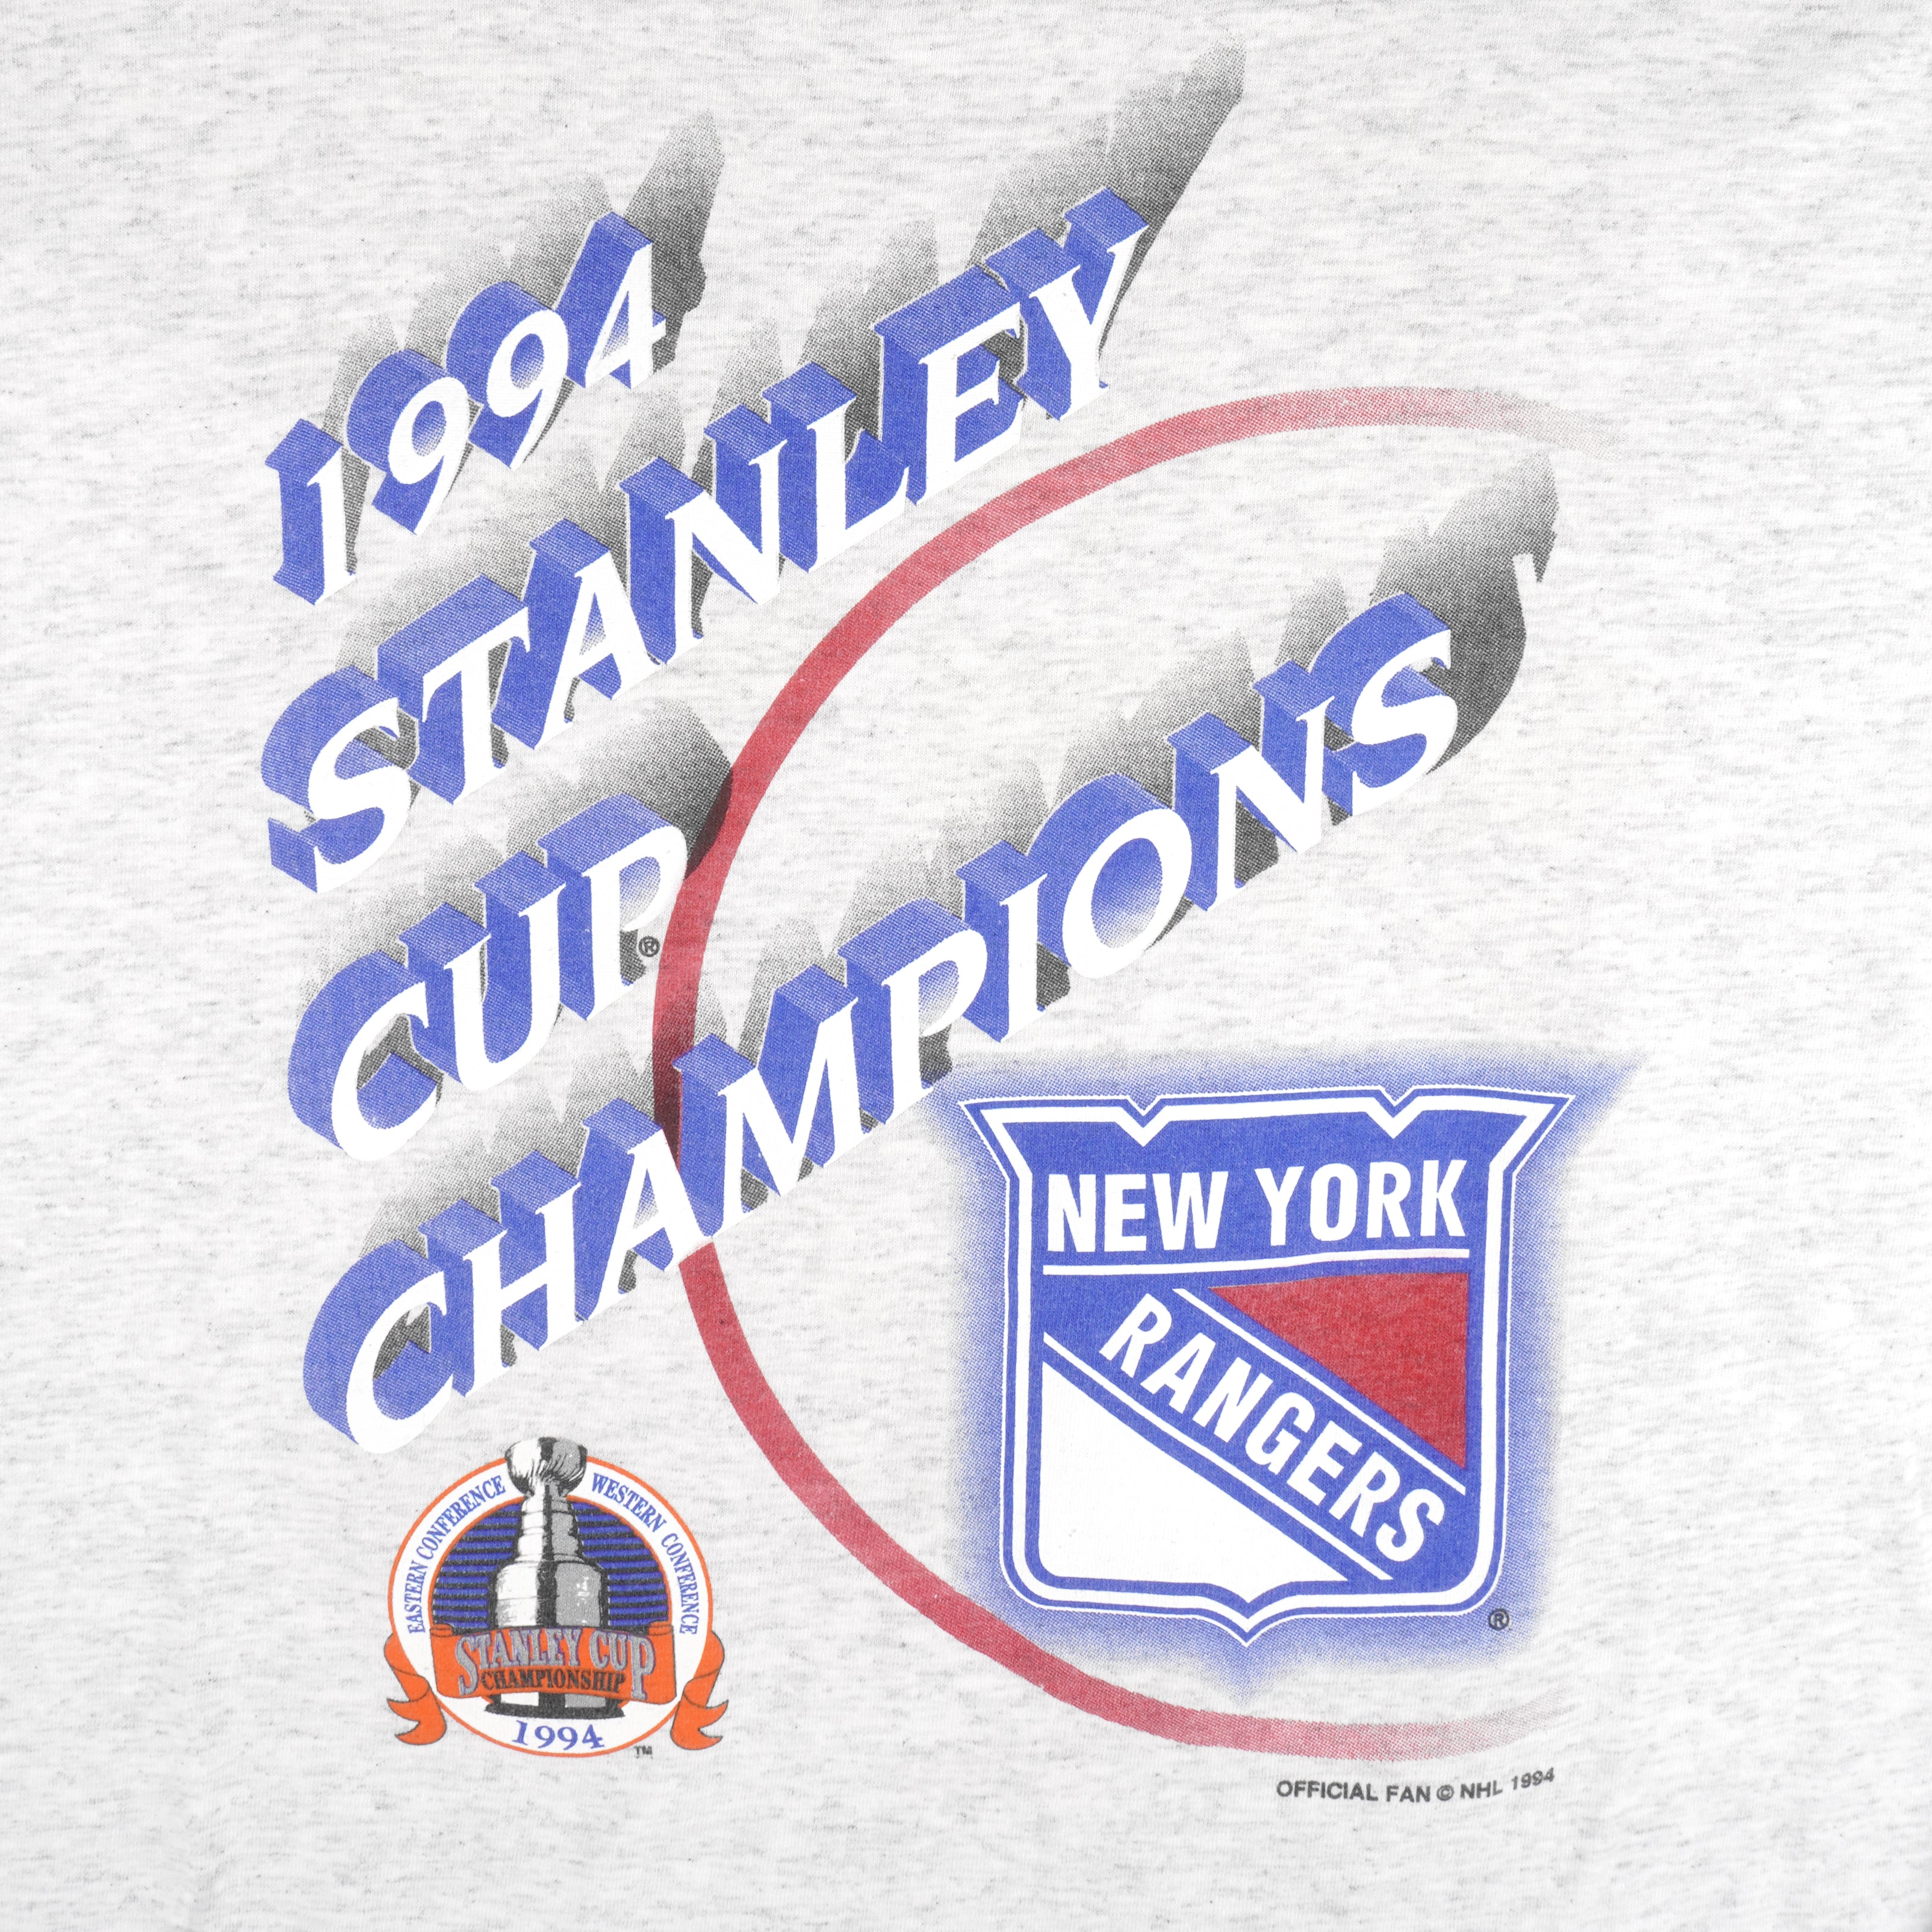 New York Rangers 1994 Stanley Cup Champion XL new with tag Super